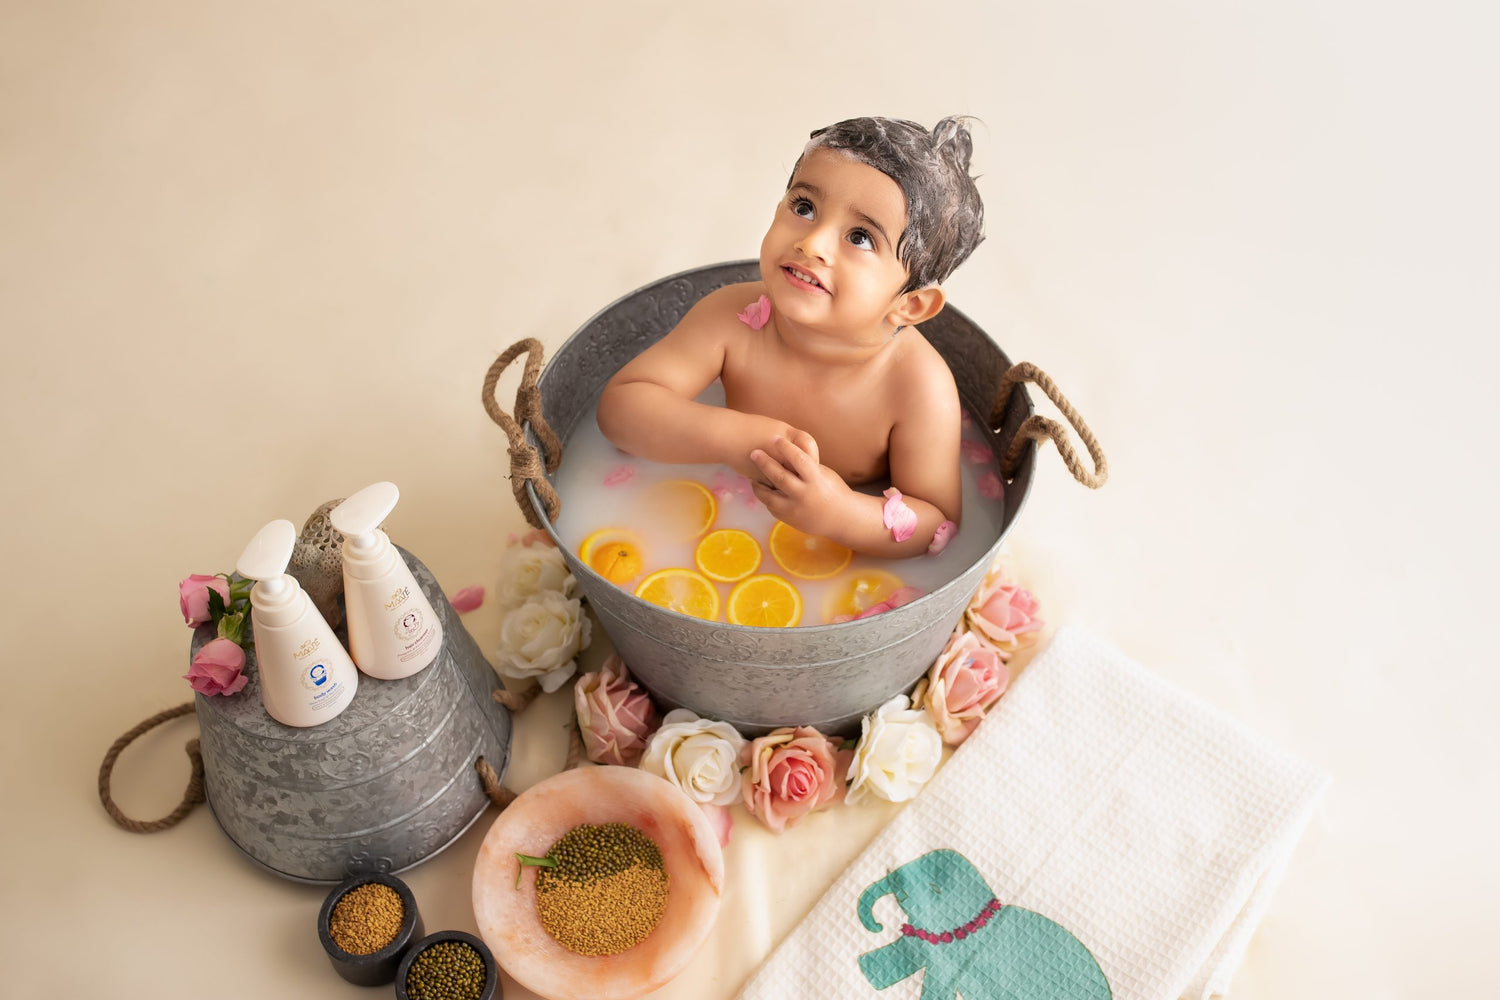 Soap Vs Baby Body Wash: What’s better for your baby?